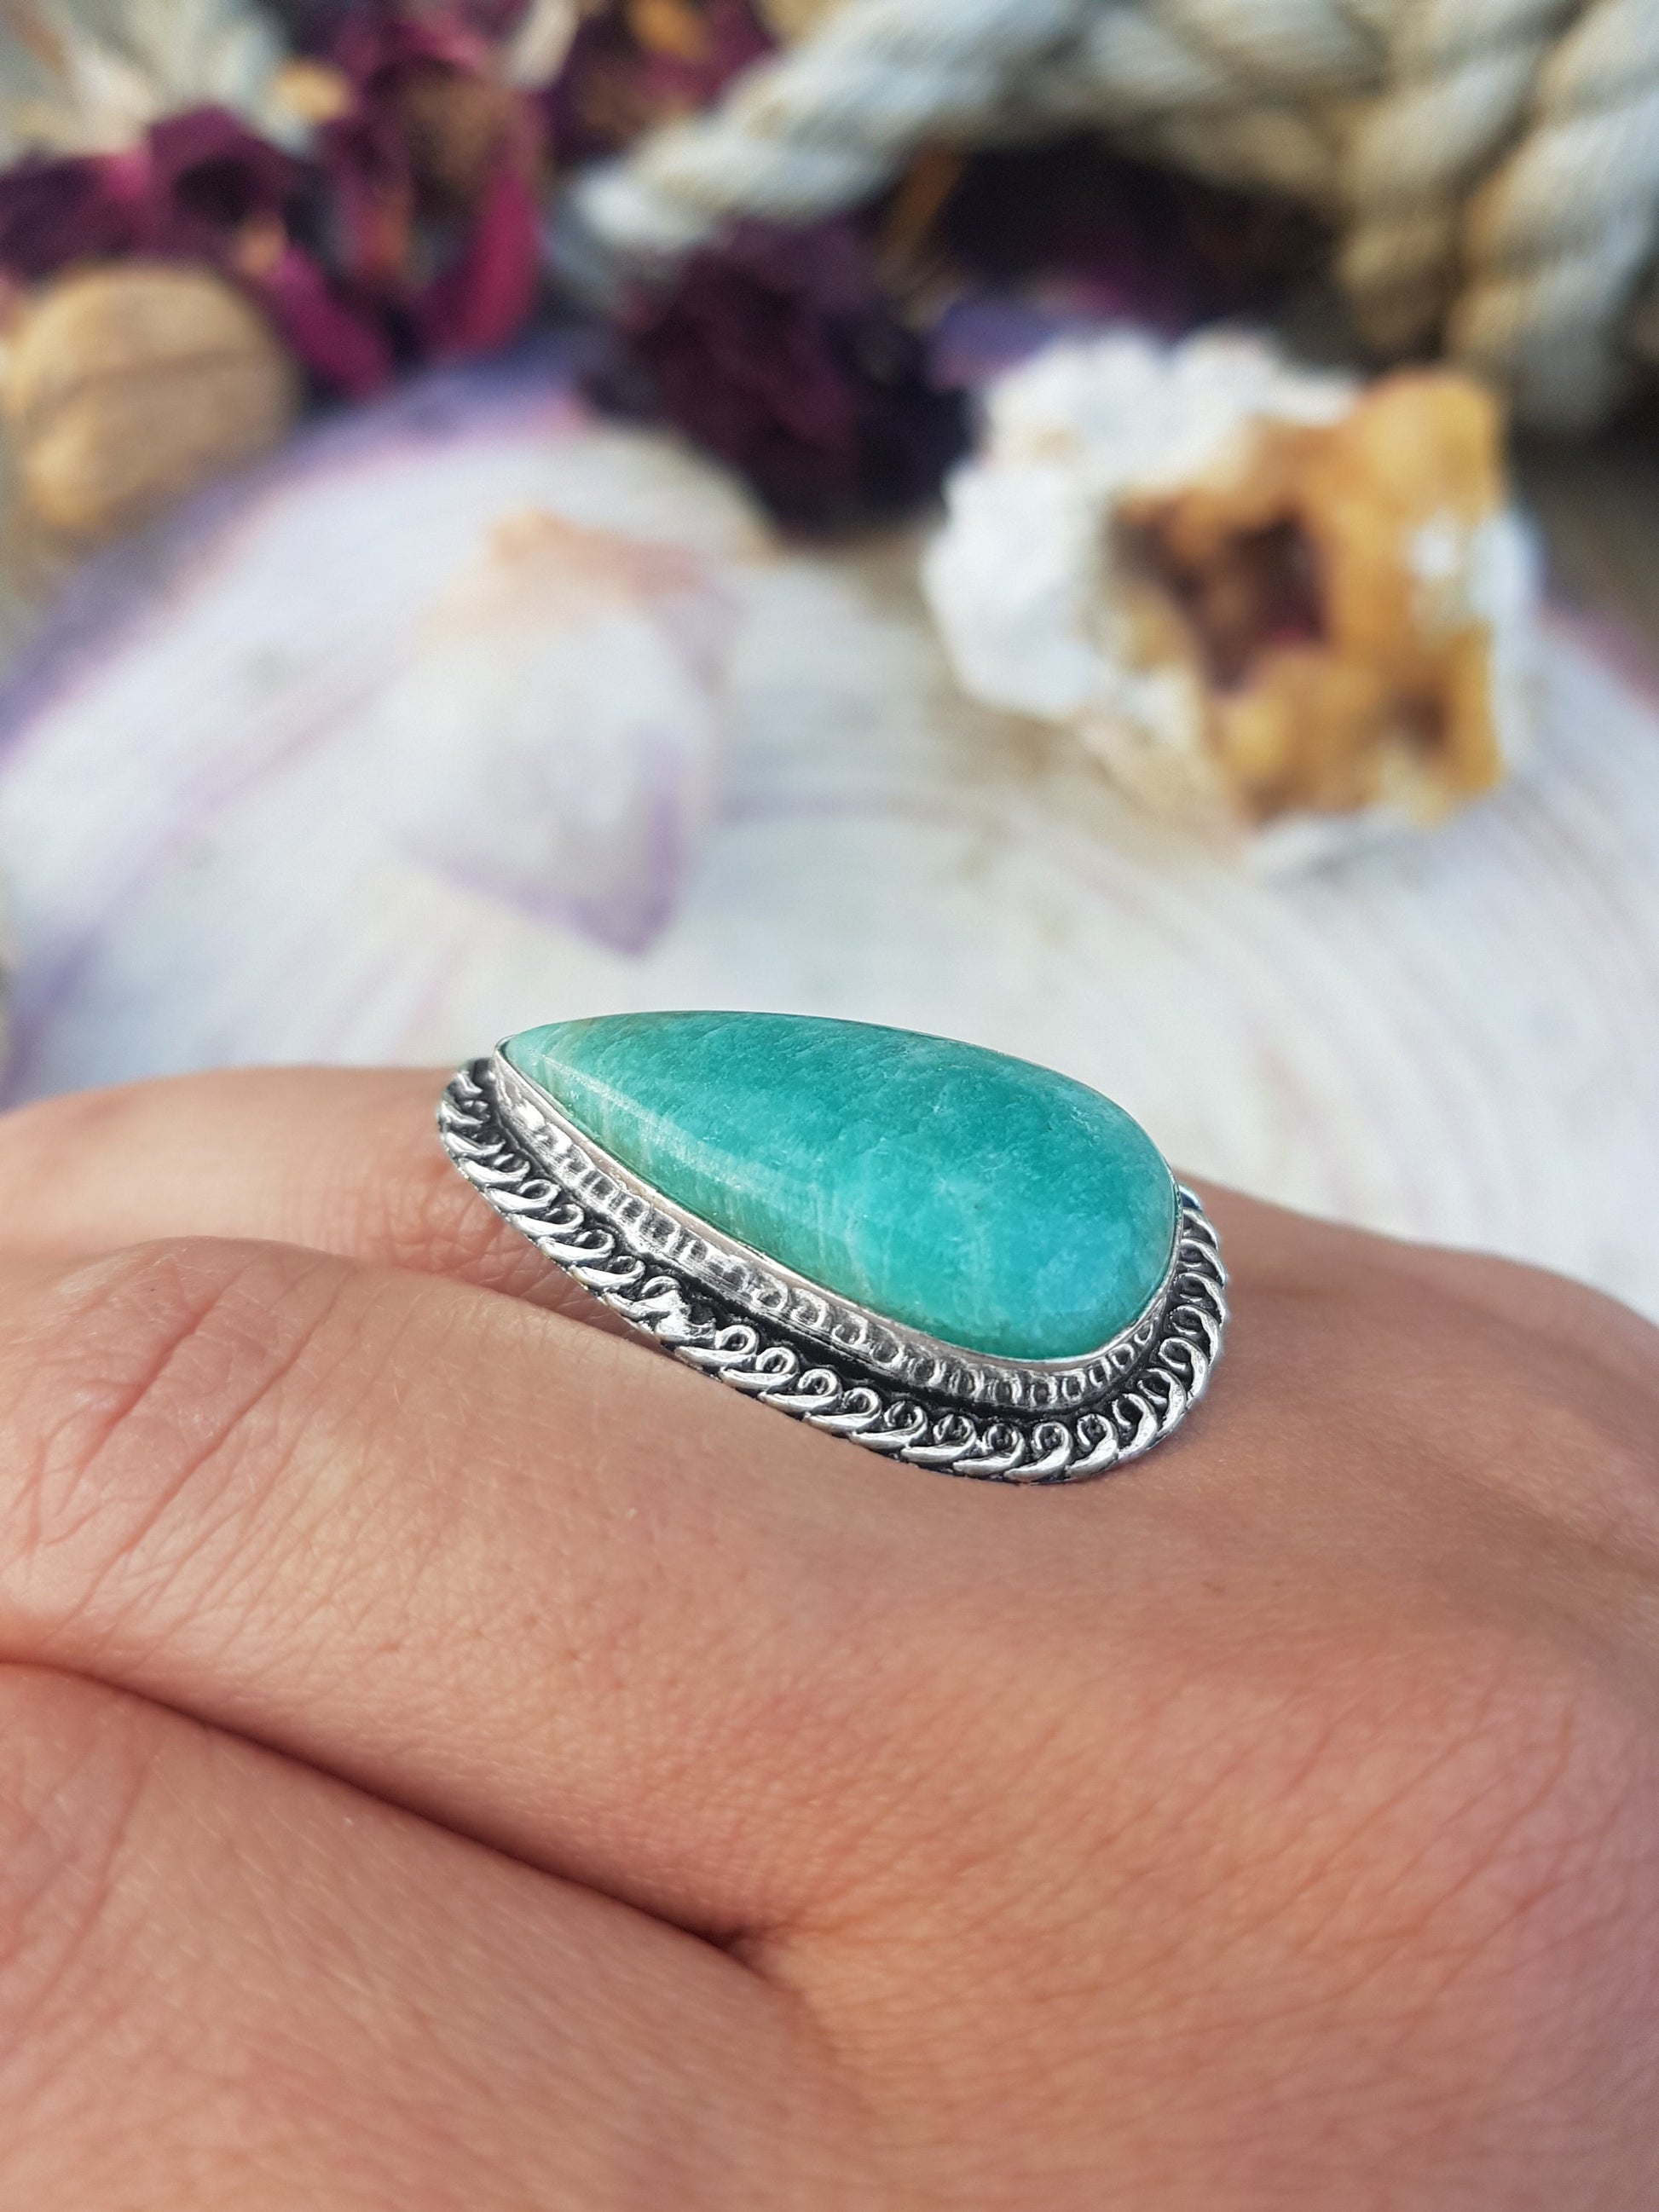 RESERVED Amazonite Statement Ring Sterling Silver Gemstone Ring Size US 7 1/4